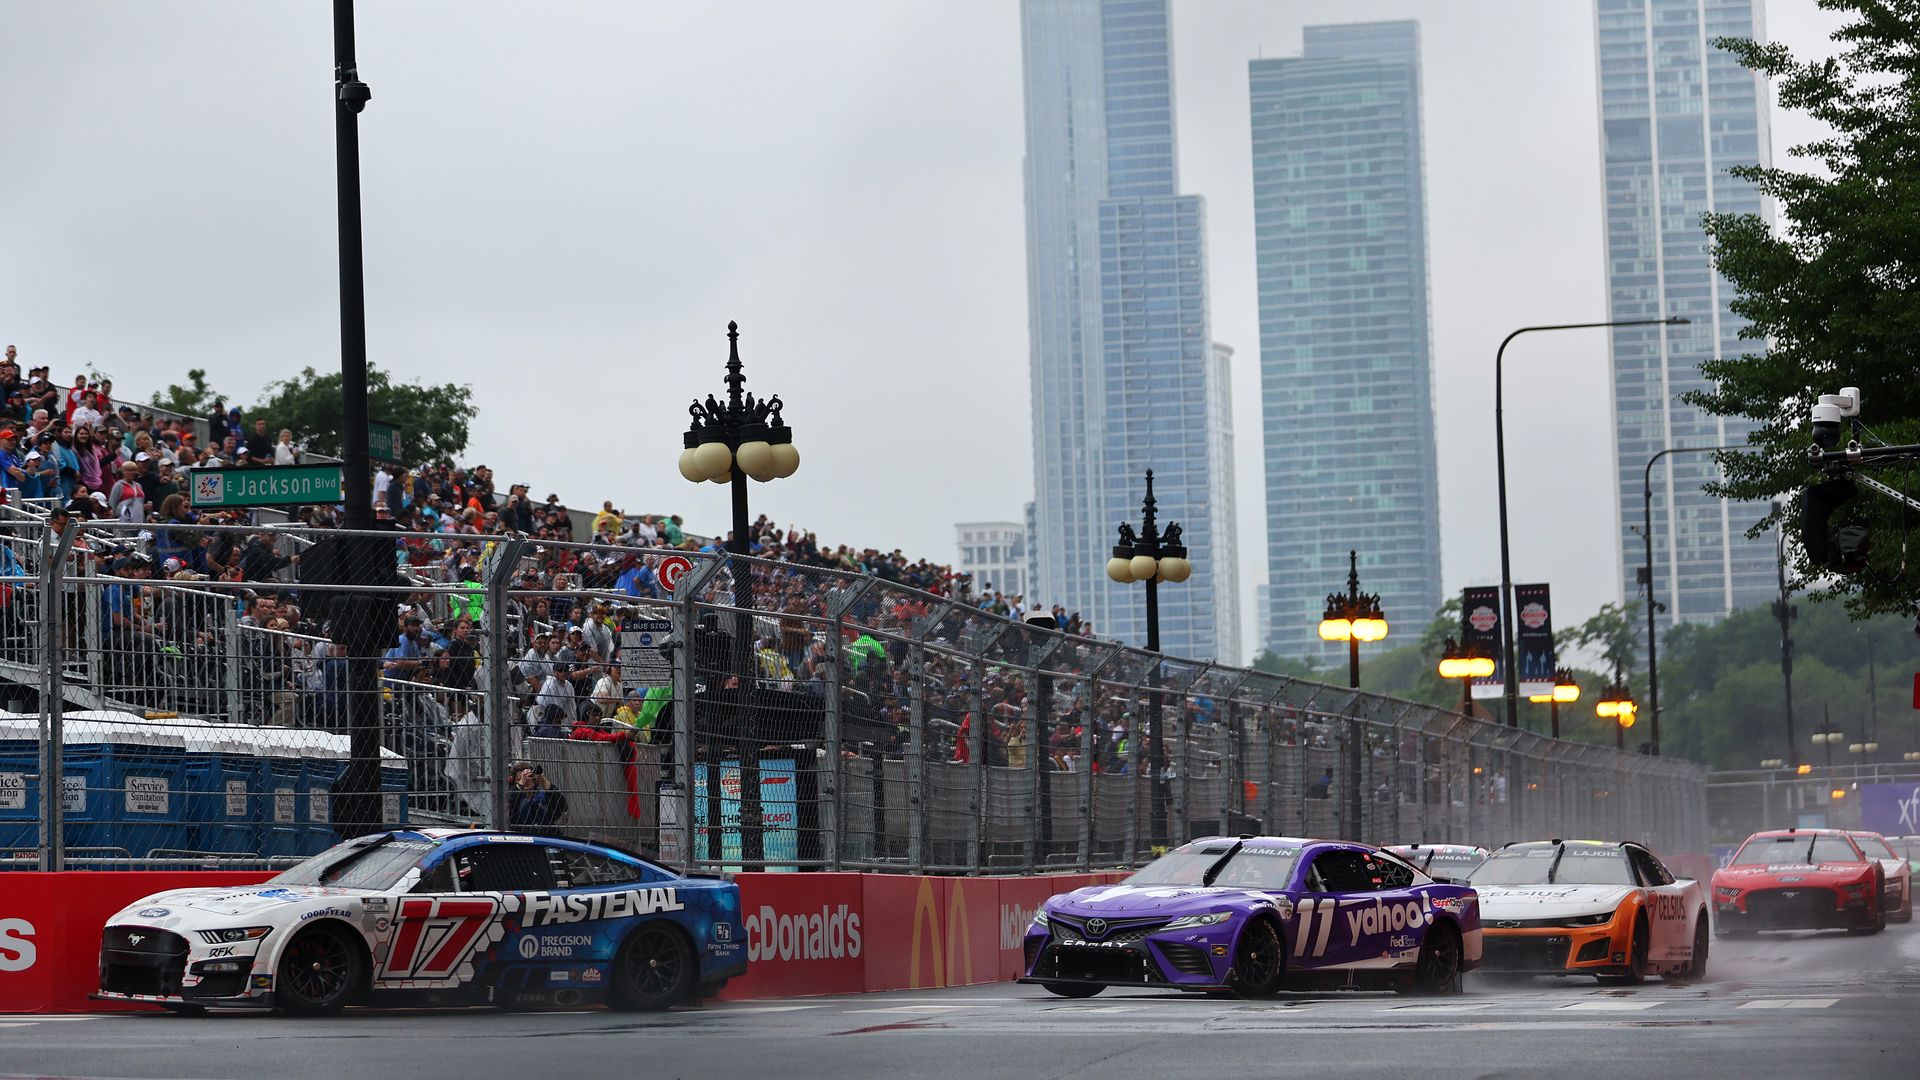 Race cars whip around a turn near stands of fans and the Chicago skyline in the background.